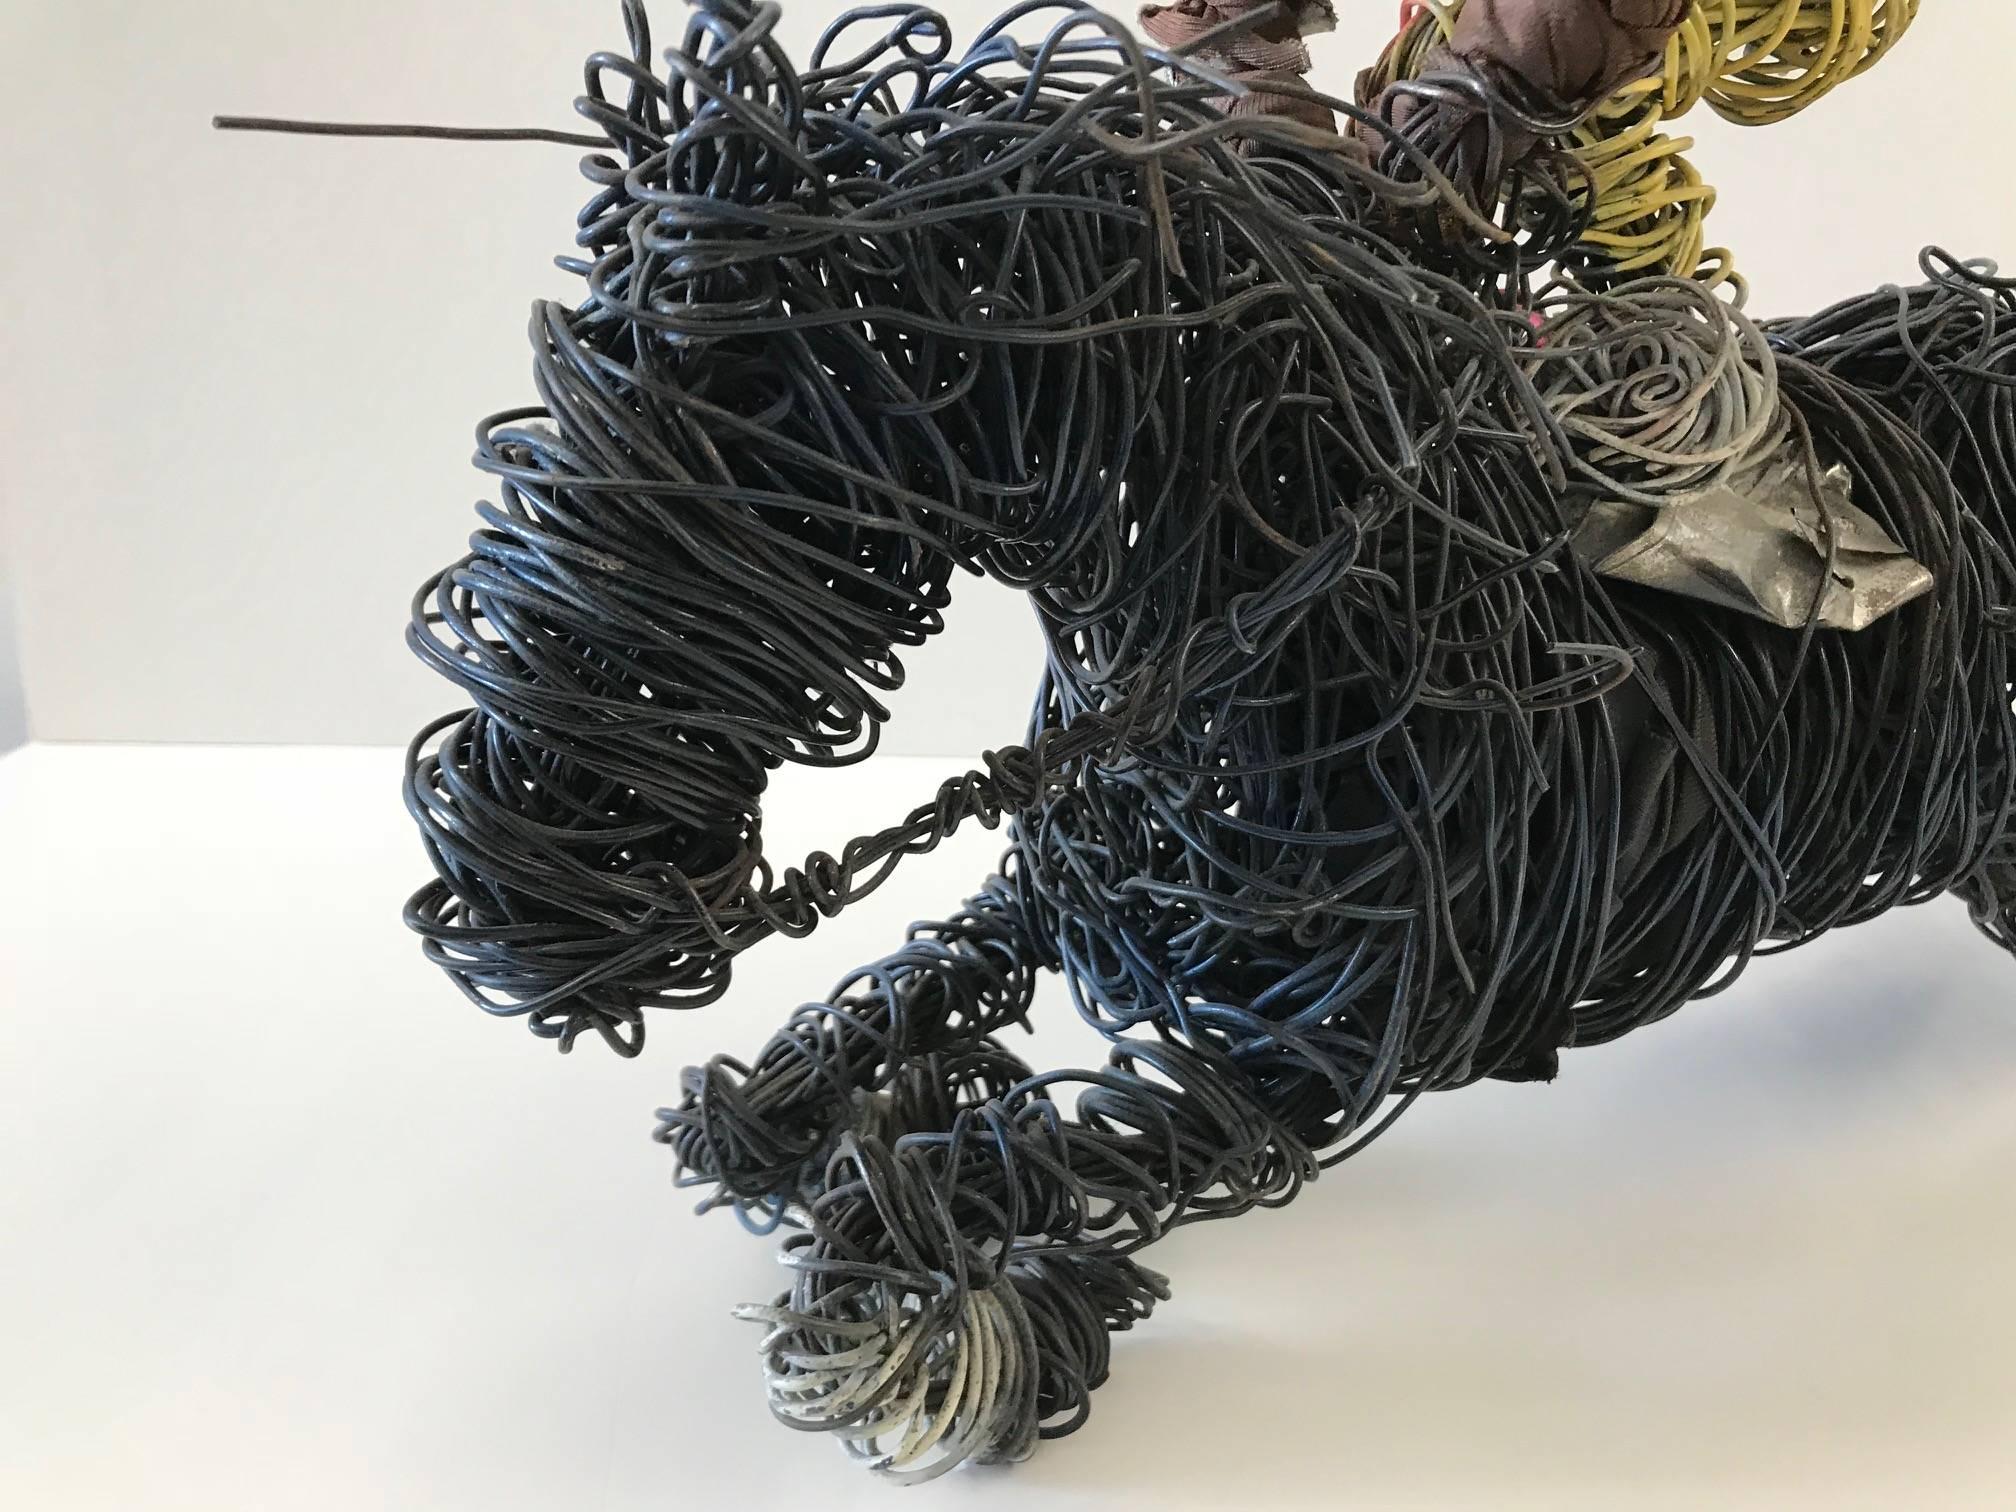 Untitled (Wired Jockey on Horse Sculpture) - Gray Abstract Sculpture by Unknown